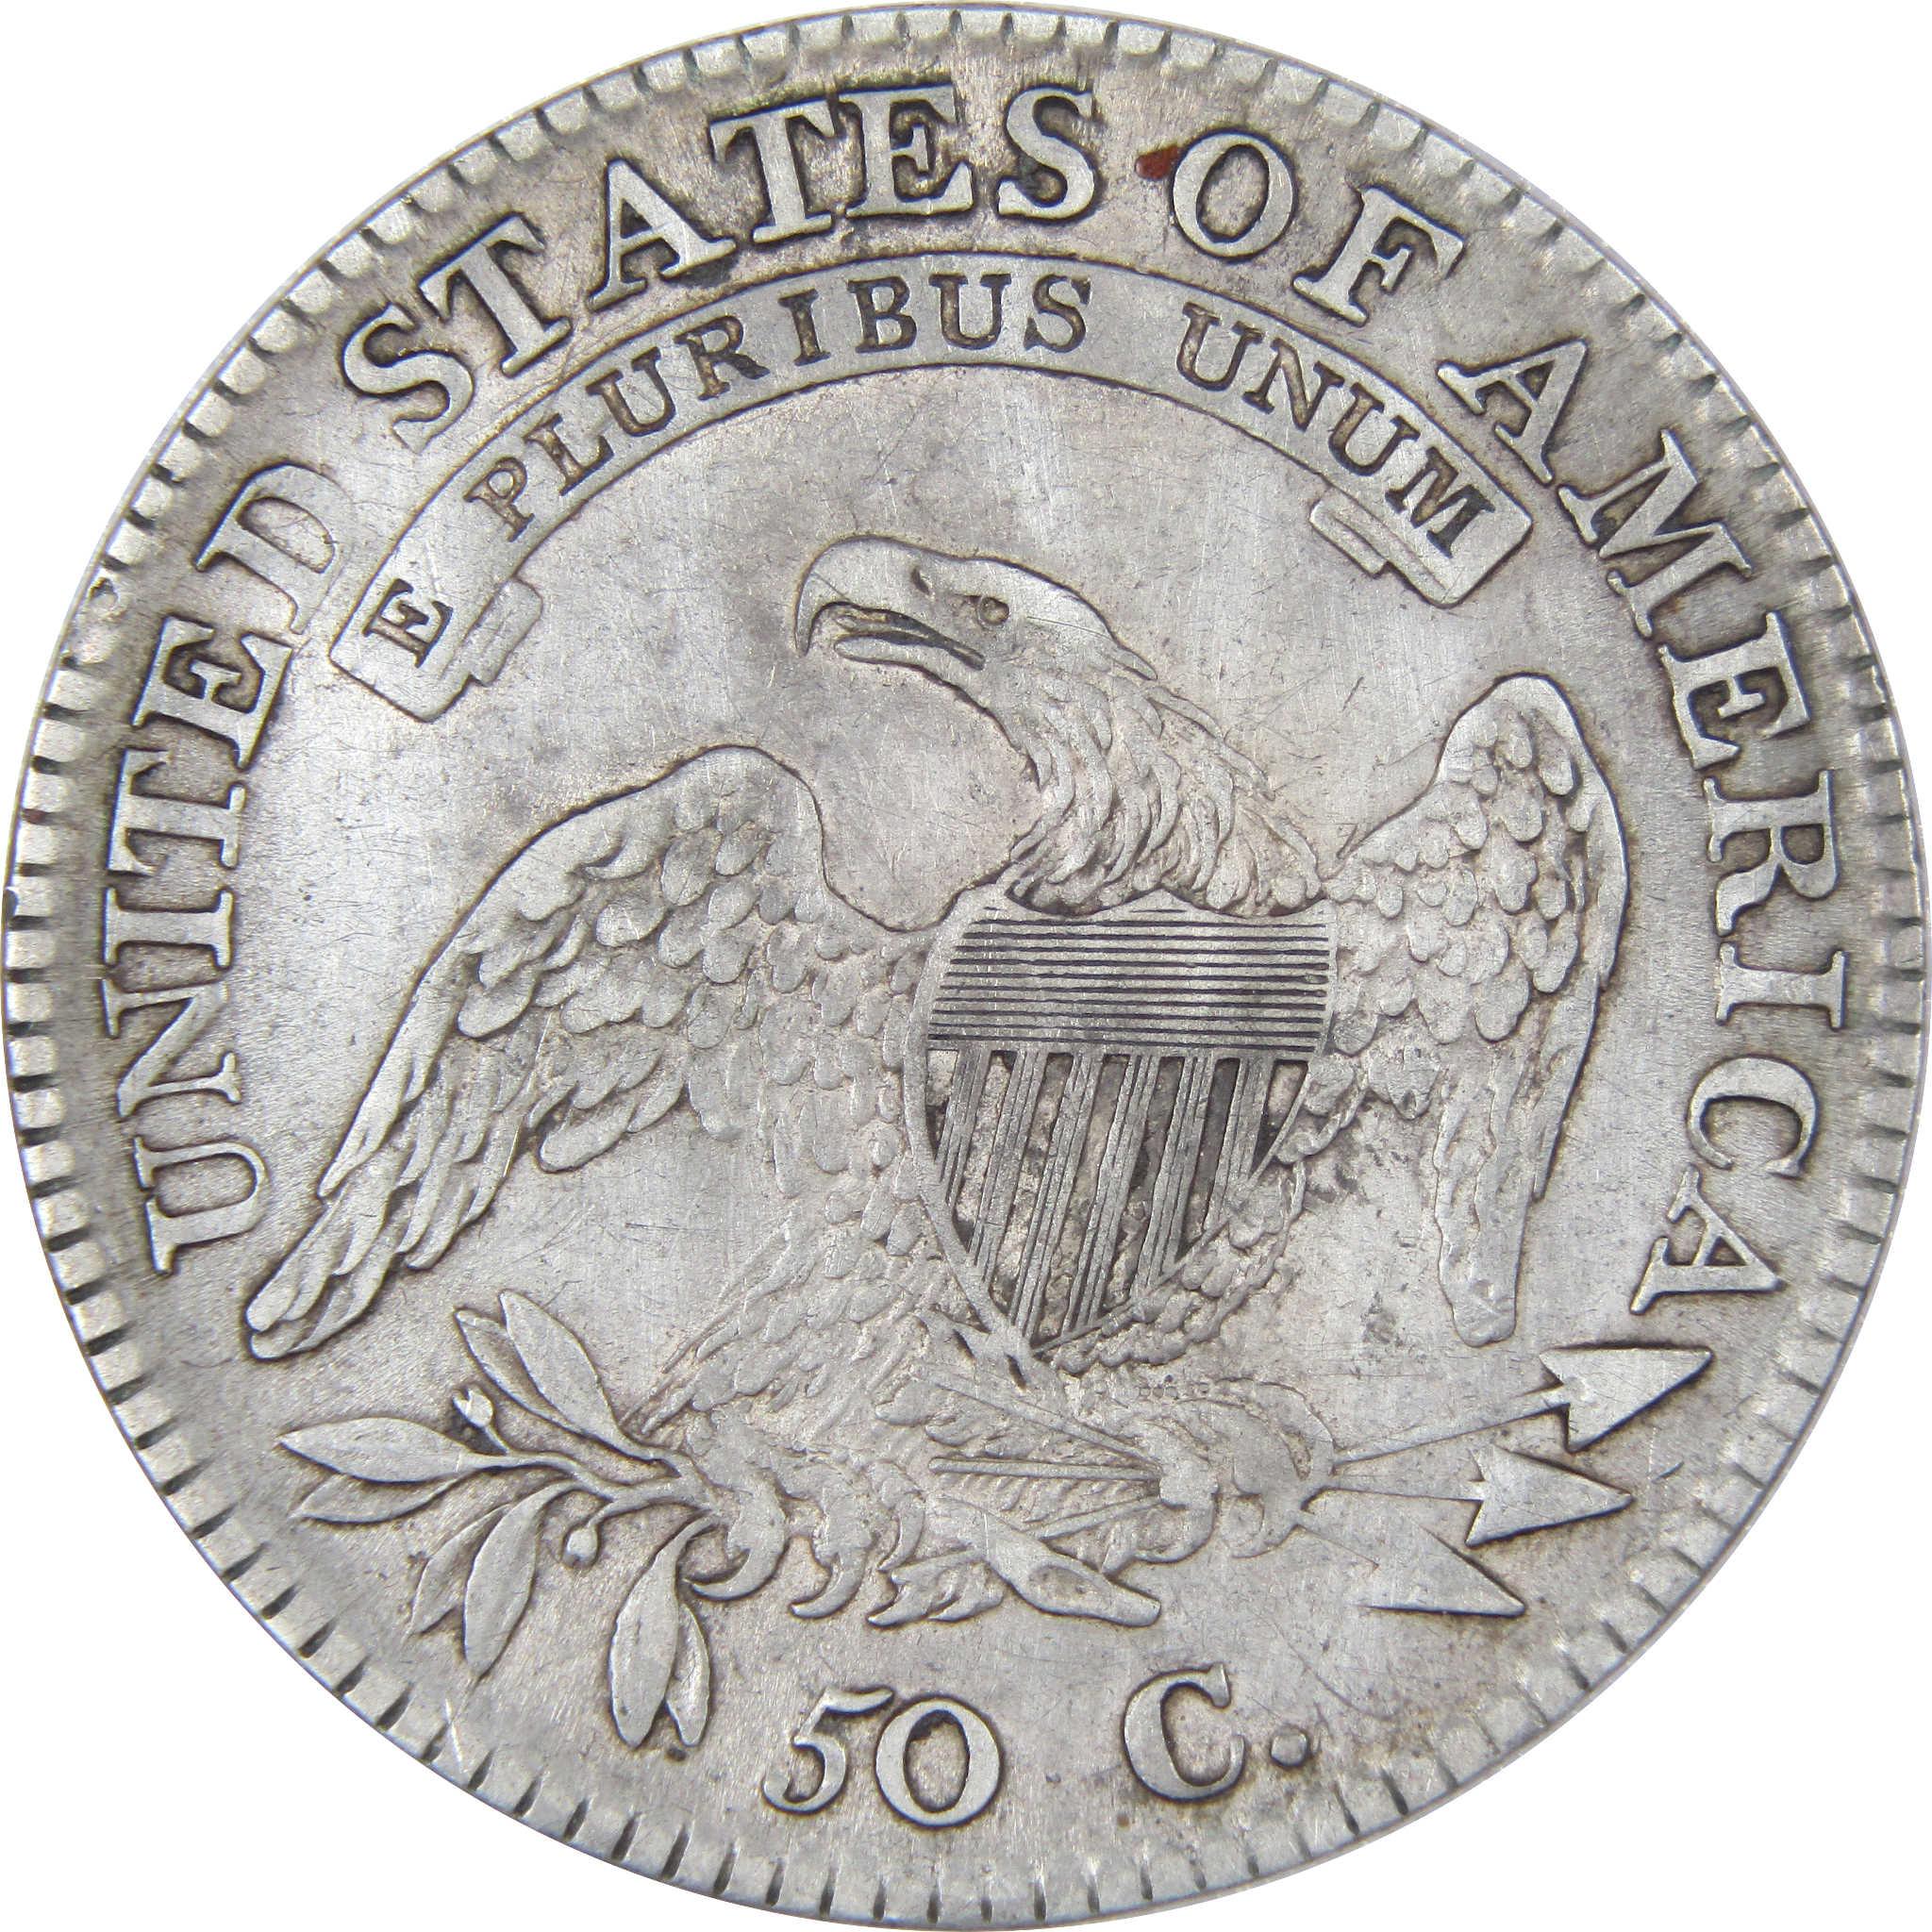 1814 Capped Bust Half Dollar Extremely Fine DetailsSilver SKU:CPC1337